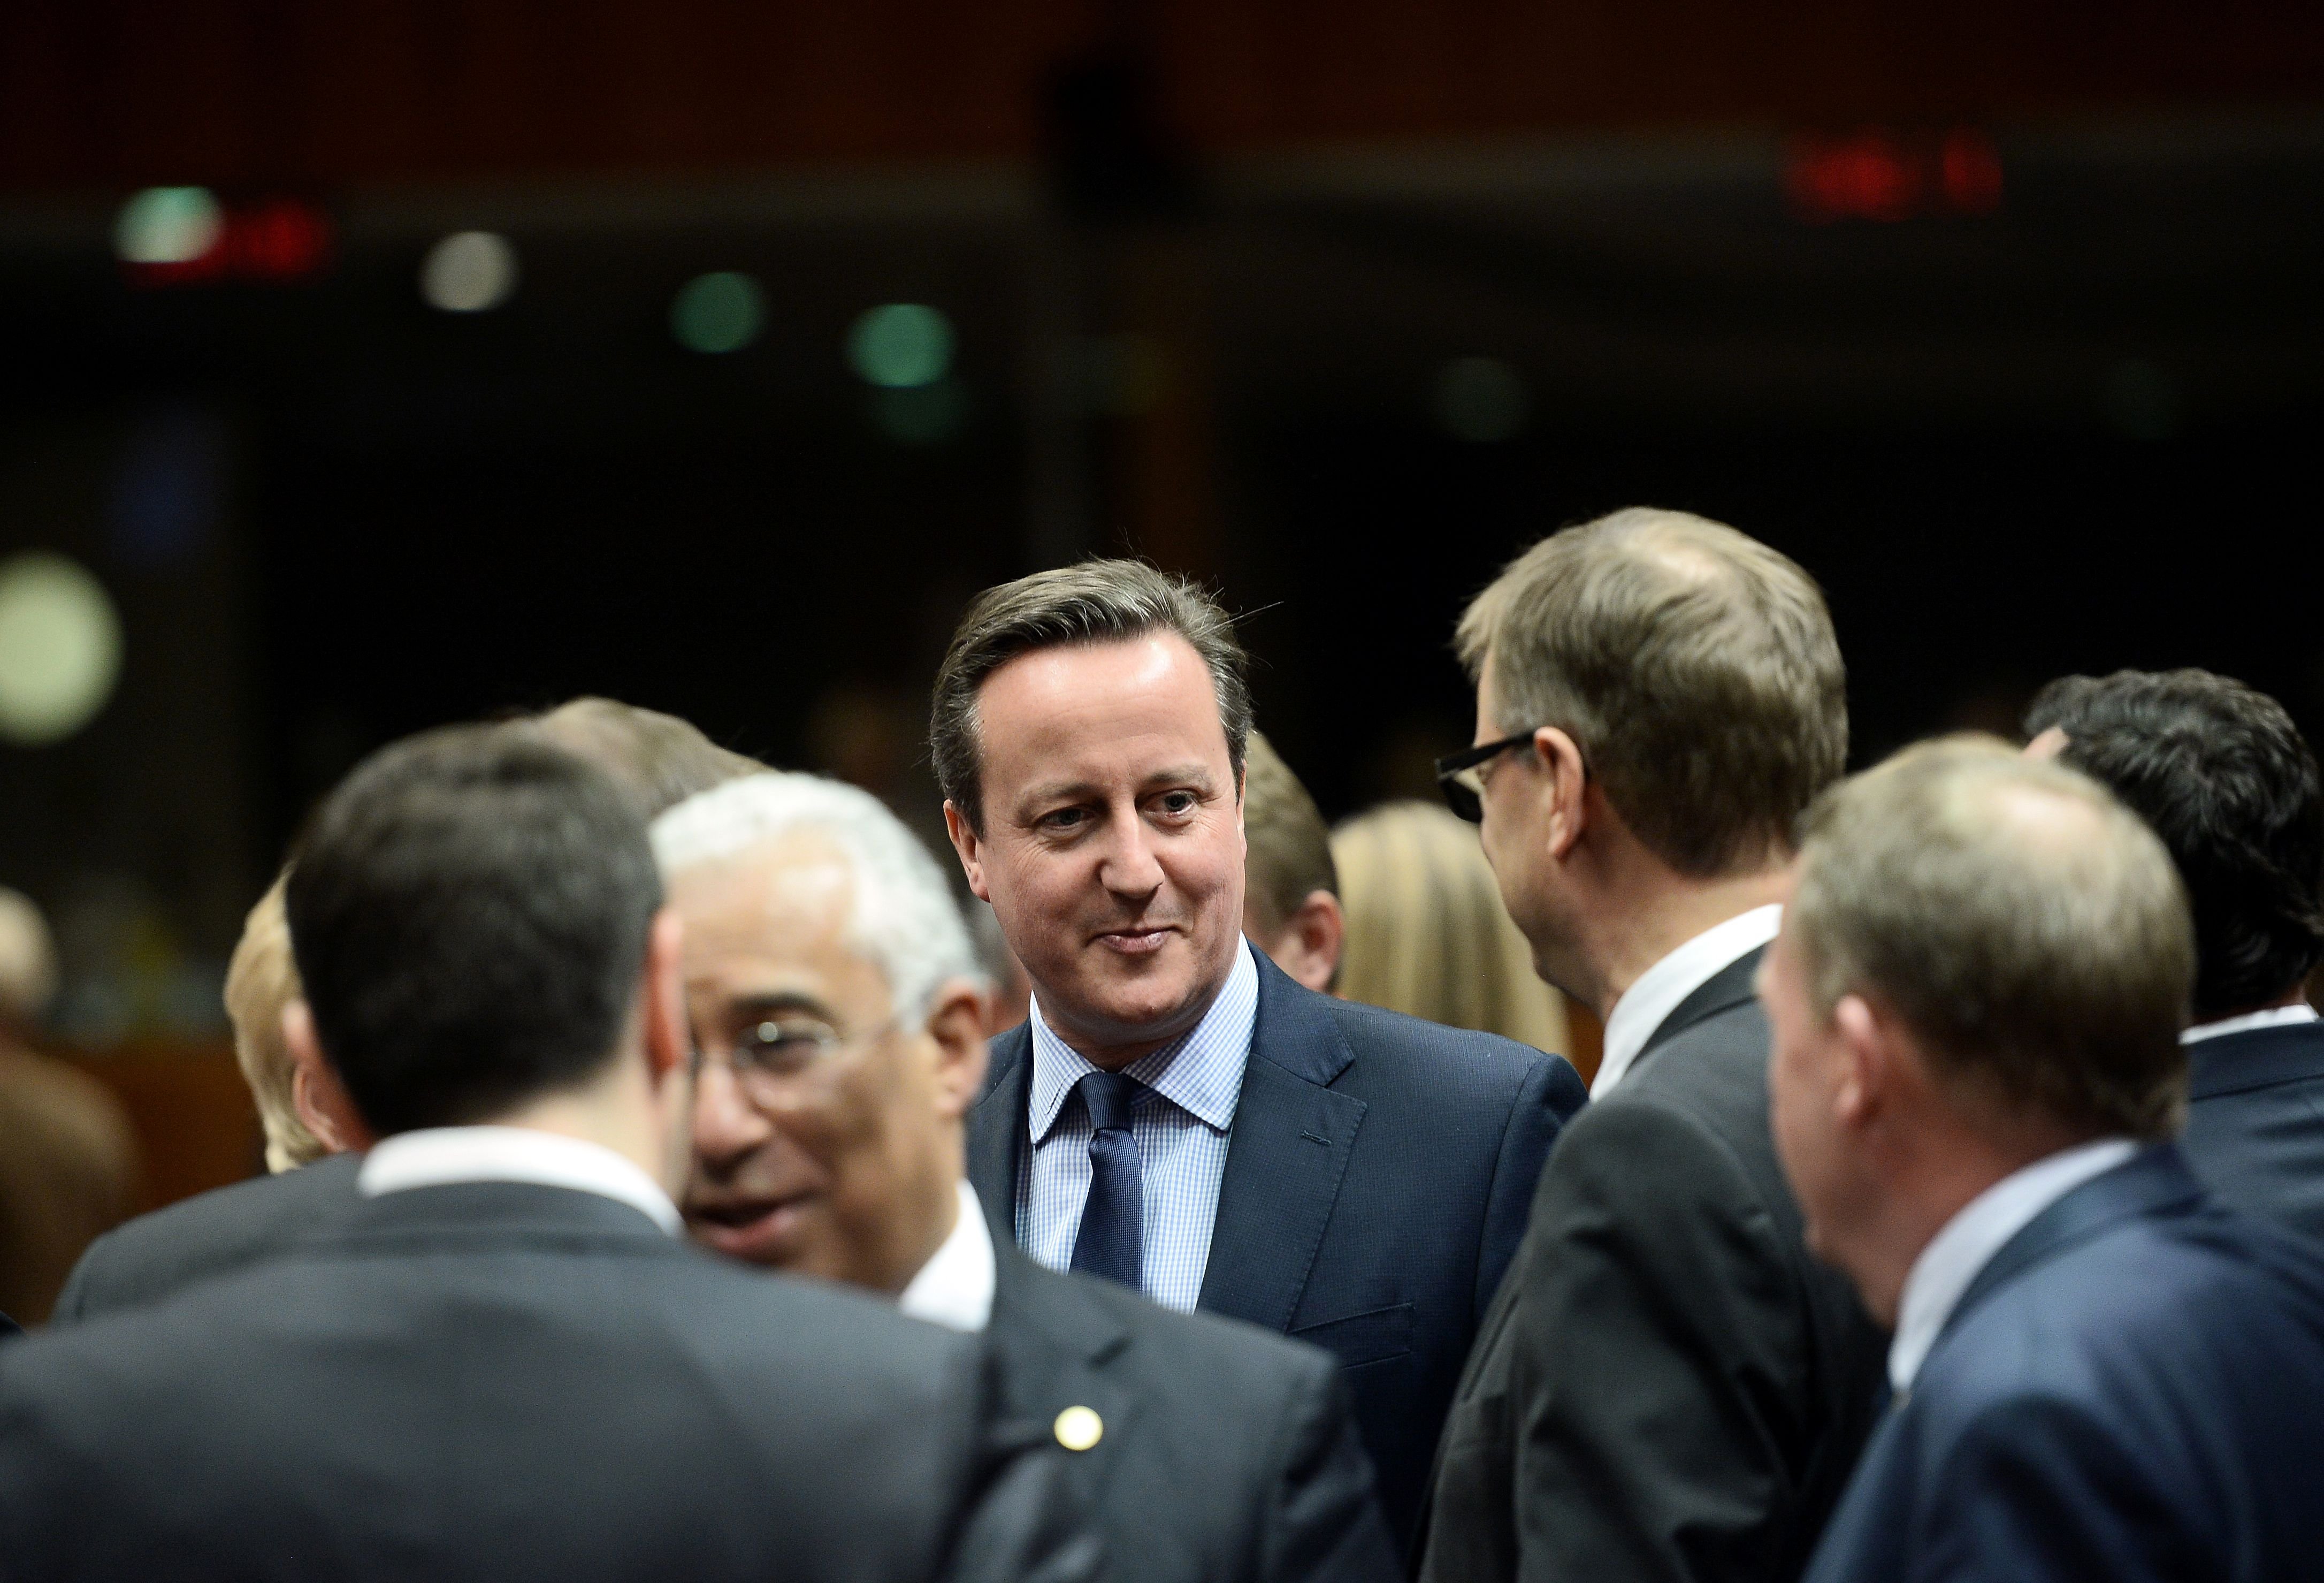 Britain's Prime Minister David Cameron attends an EU summit meeting, at the European Union council in Brussels, on Feb. 18, 2016. (Stephane De Sakutin—AFP/Getty Images)